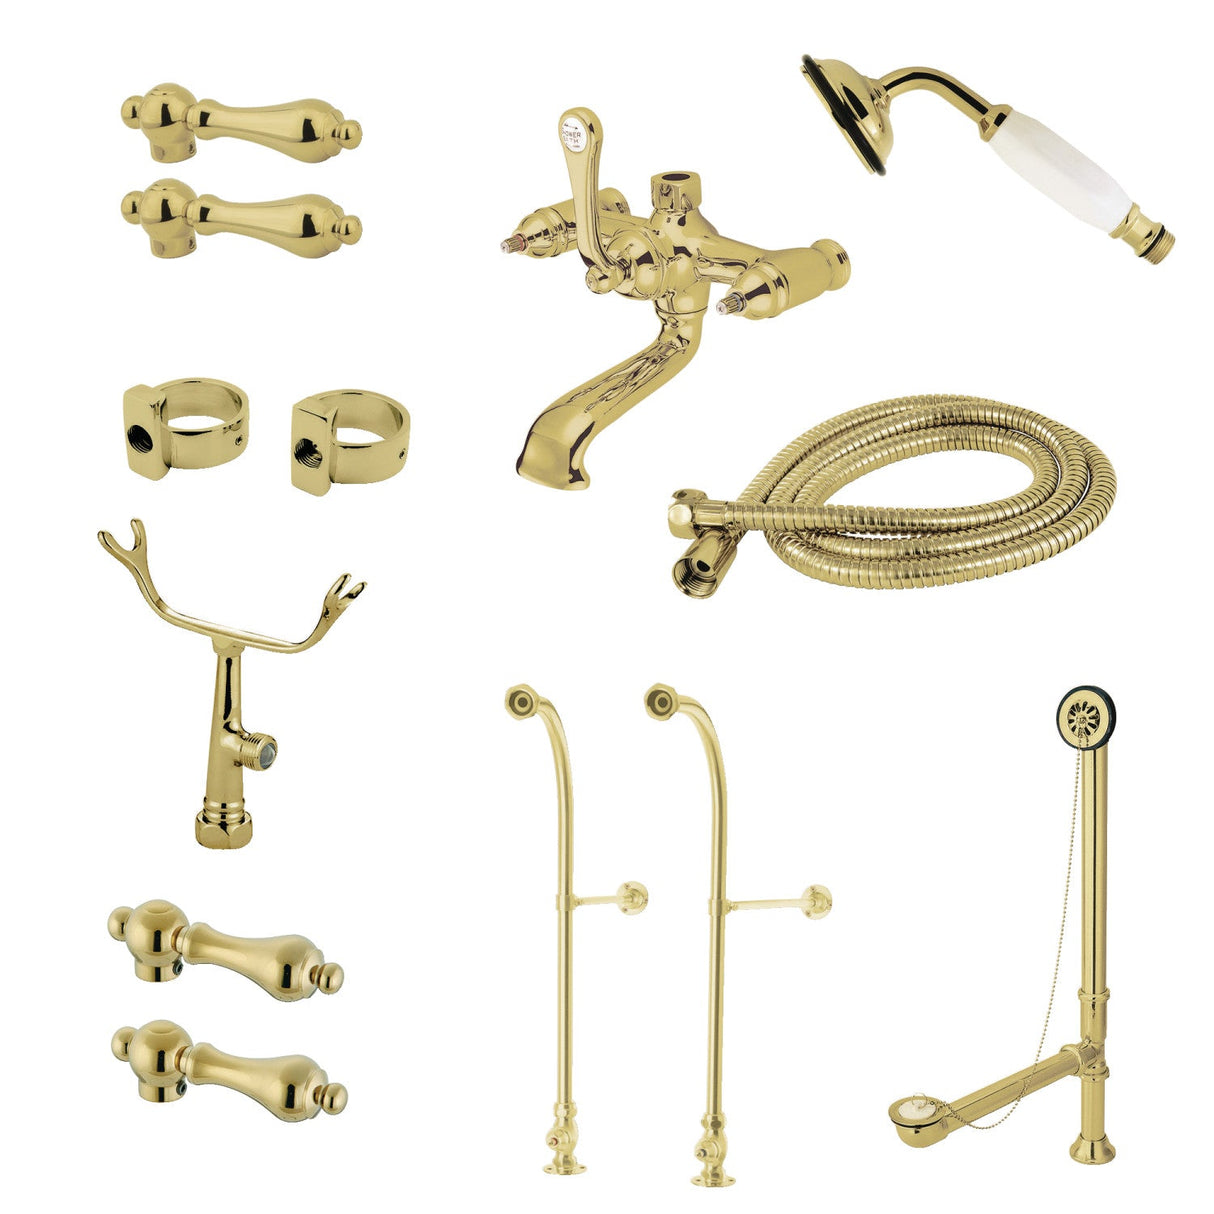 Vintage CCK5172AL Freestanding Clawfoot Tub Faucet Package with Supply Line, Polished Brass